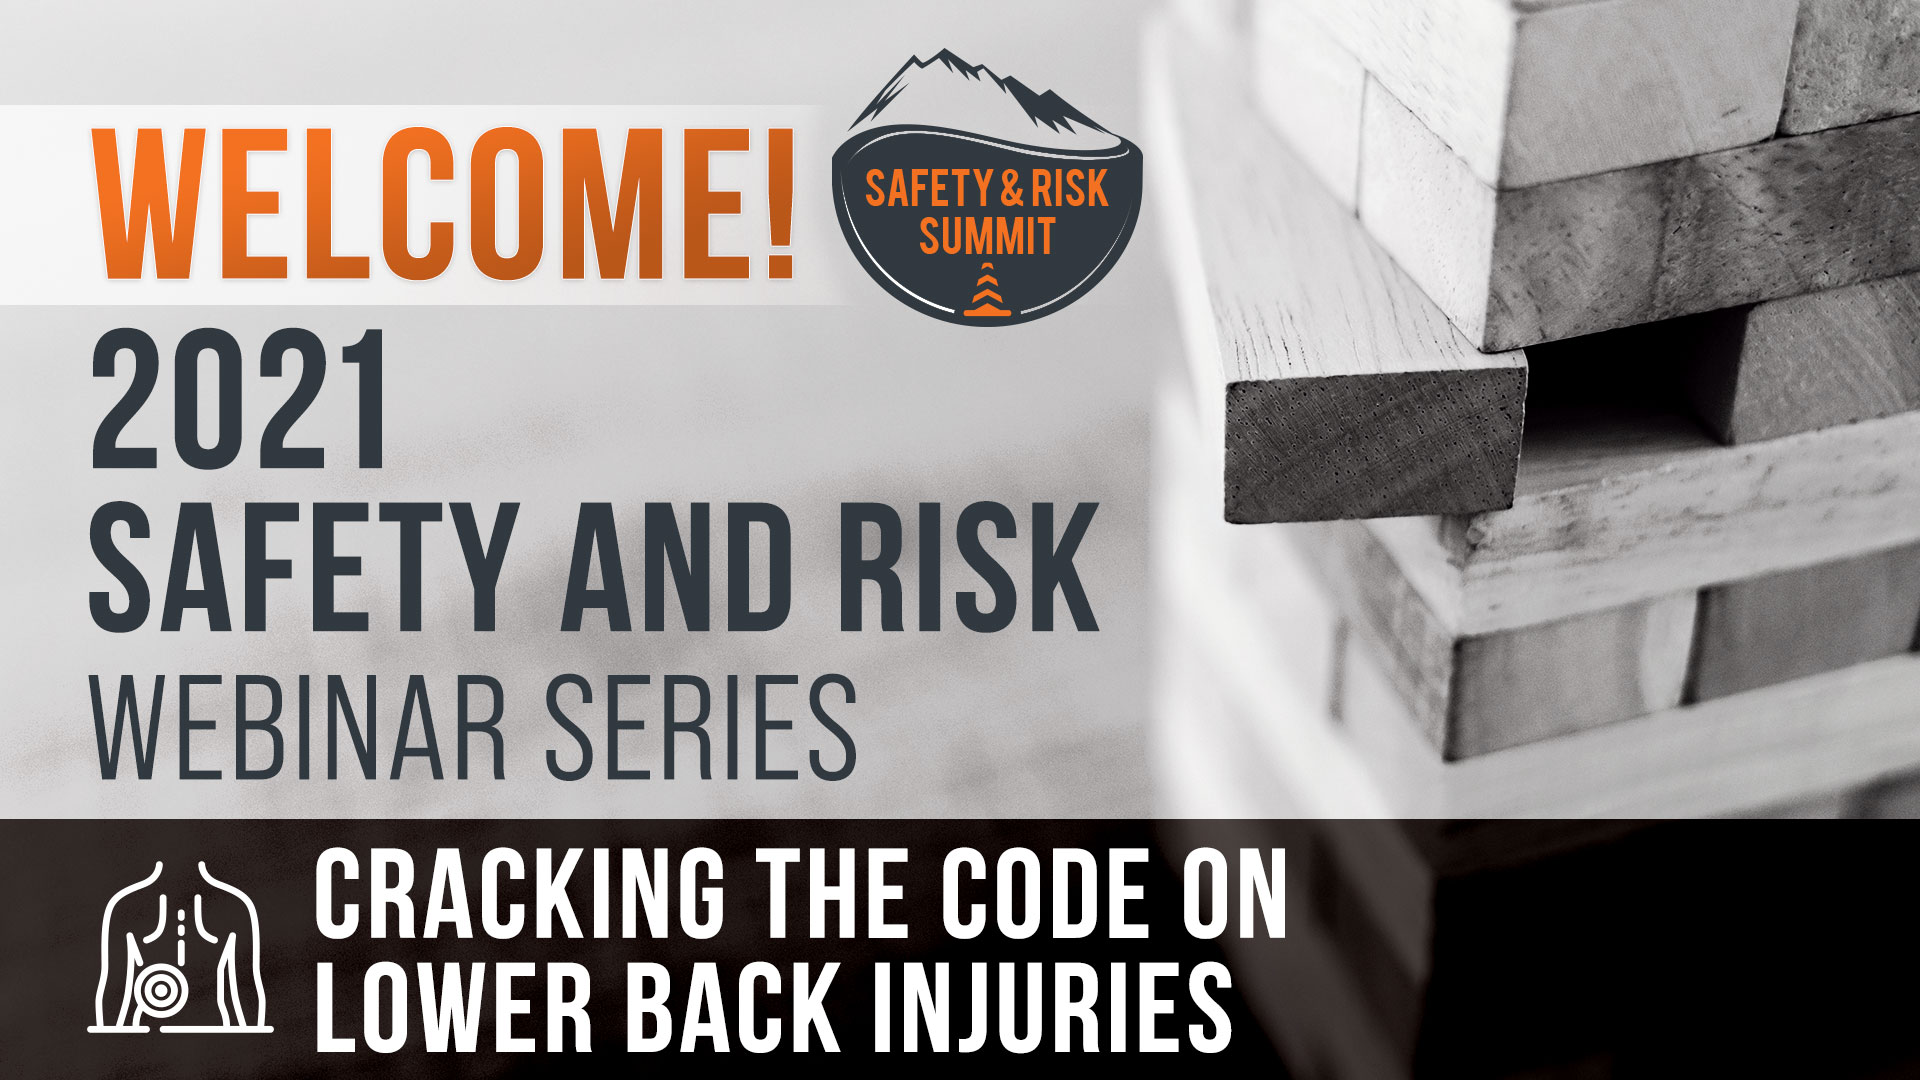 Safety and Risk Series: CRACKING THE CODE ON LOWER BACK INJURIES